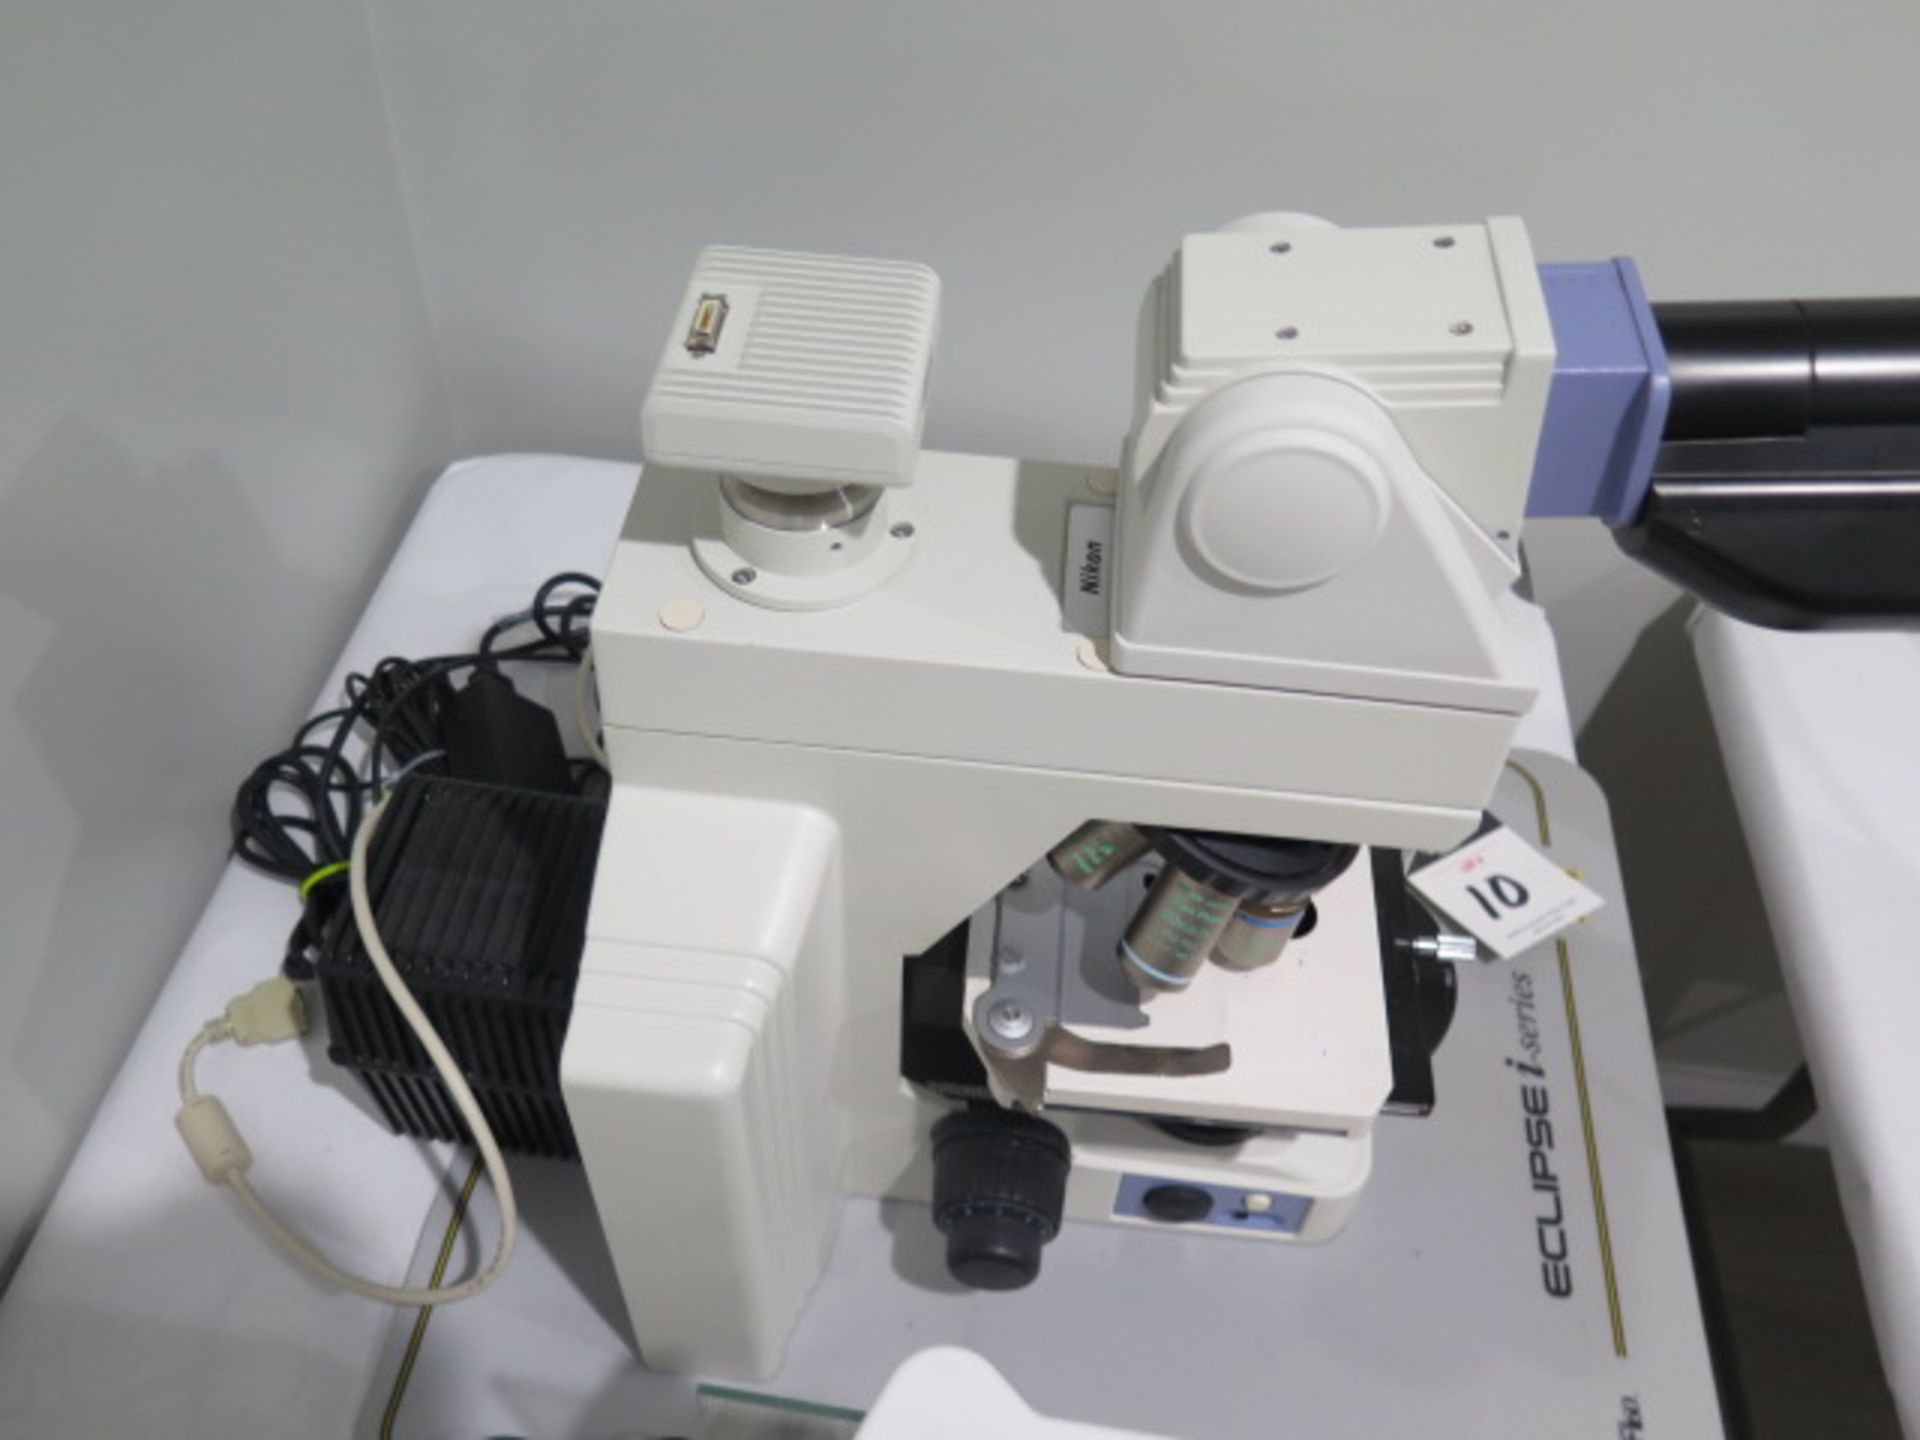 Nikon Eclipse E600 Research Microscope s/n 763673 w/ Nikon Light,DS-U2 Digital Sight Unit,SOLD AS IS - Image 9 of 15